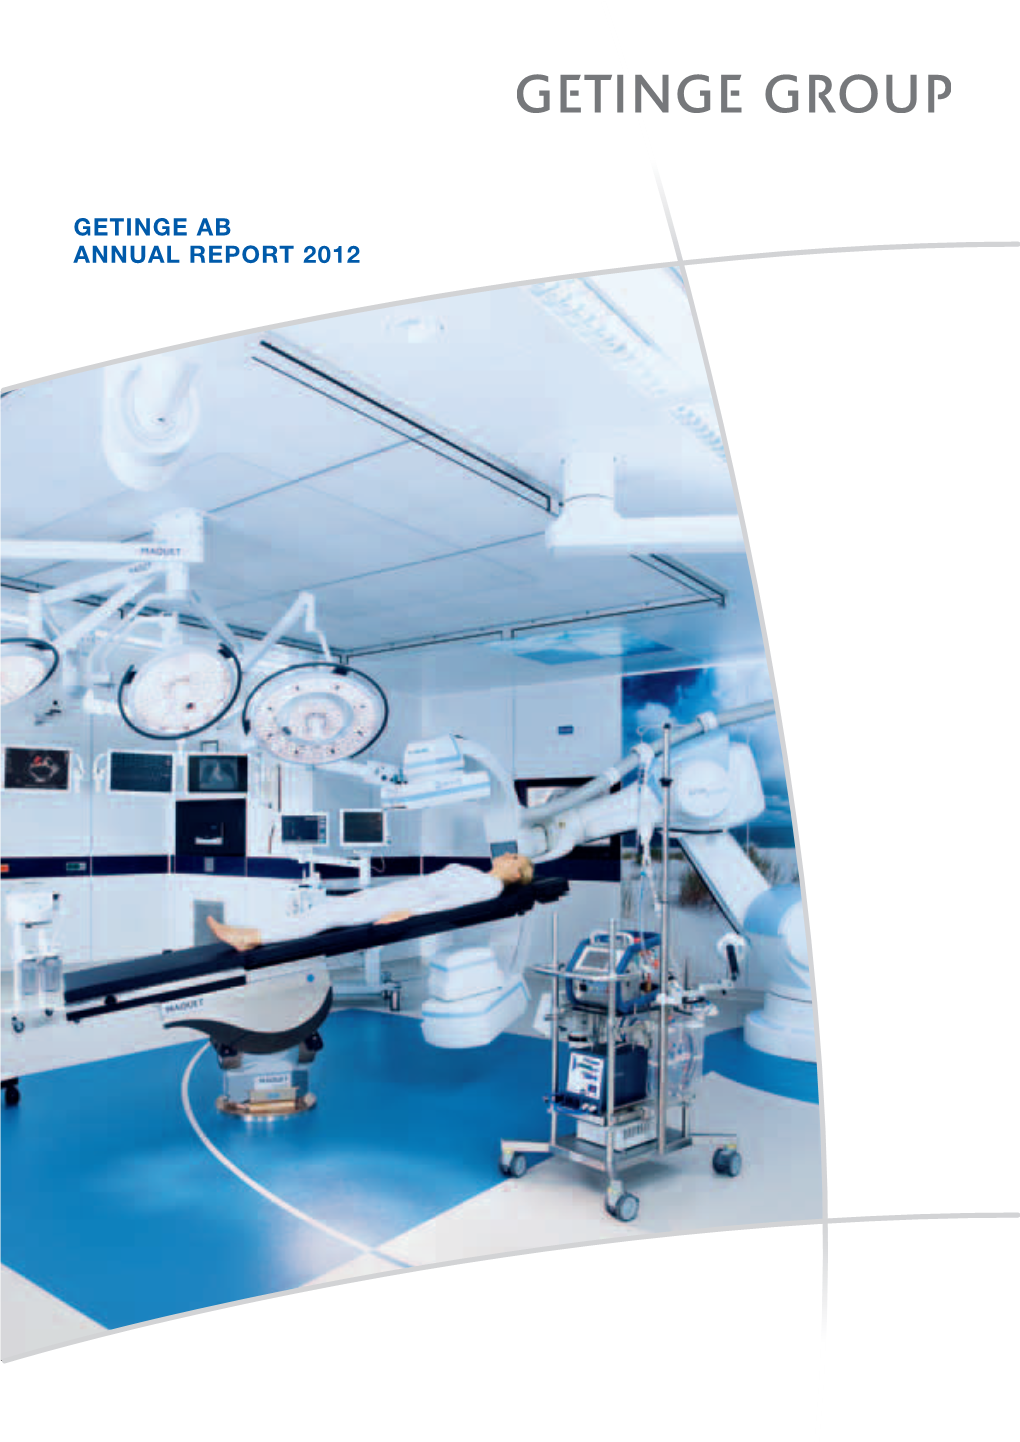 GETINGE AB ANNUAL REPORT 2012 Contents Year in Brief